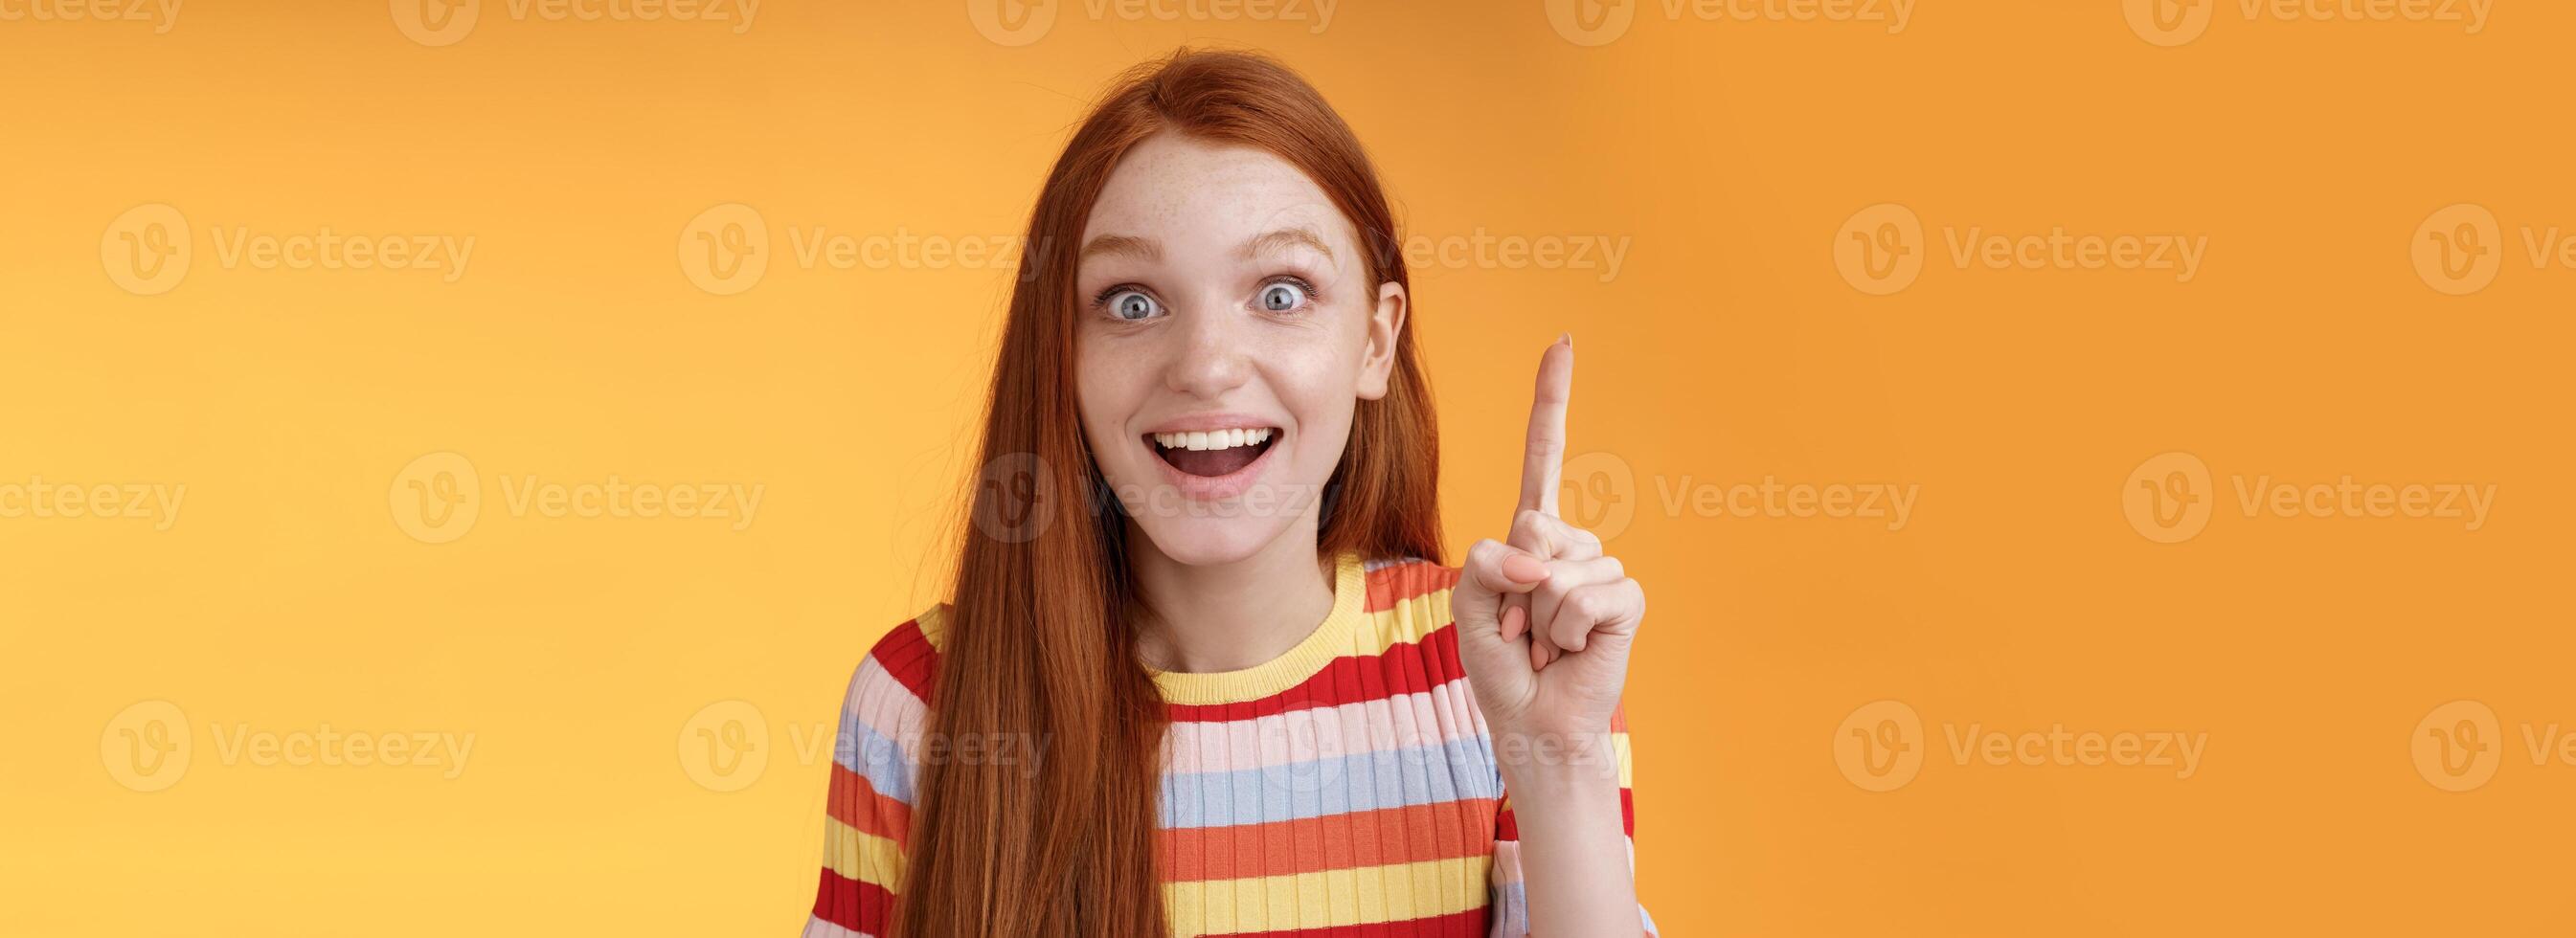 Excited happy cheerful young redhead female student got idea think answer raising index finger eureka gesture smiling thrilled wide eyes saying plan have excellent suggestion, orange background photo